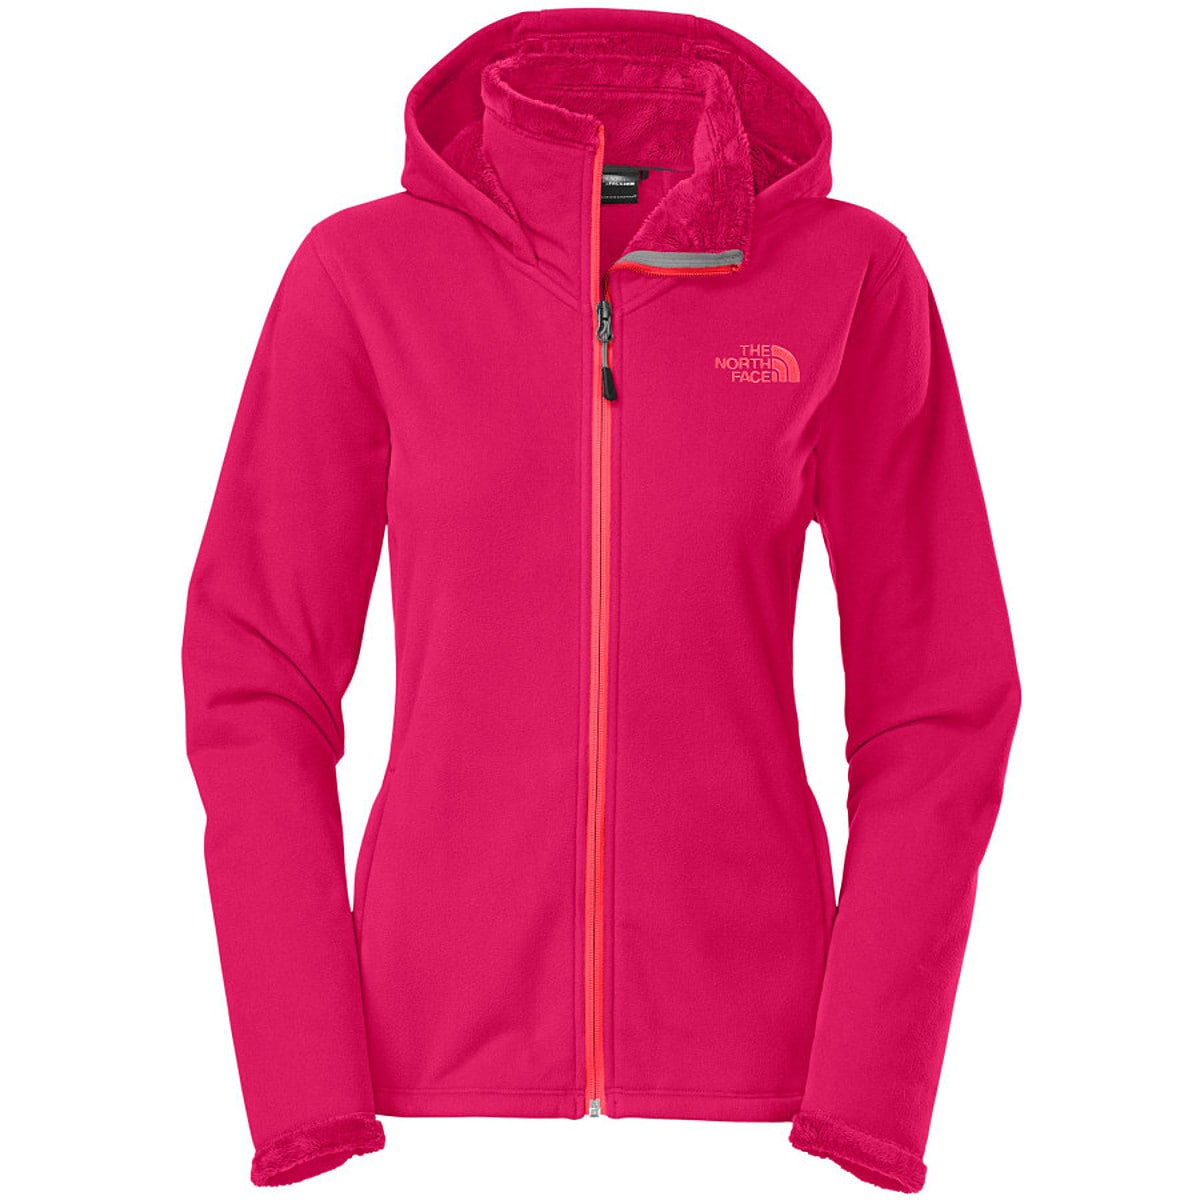 The North Face Morninglory Hooded Fleece Jacket - Women's - Clothing